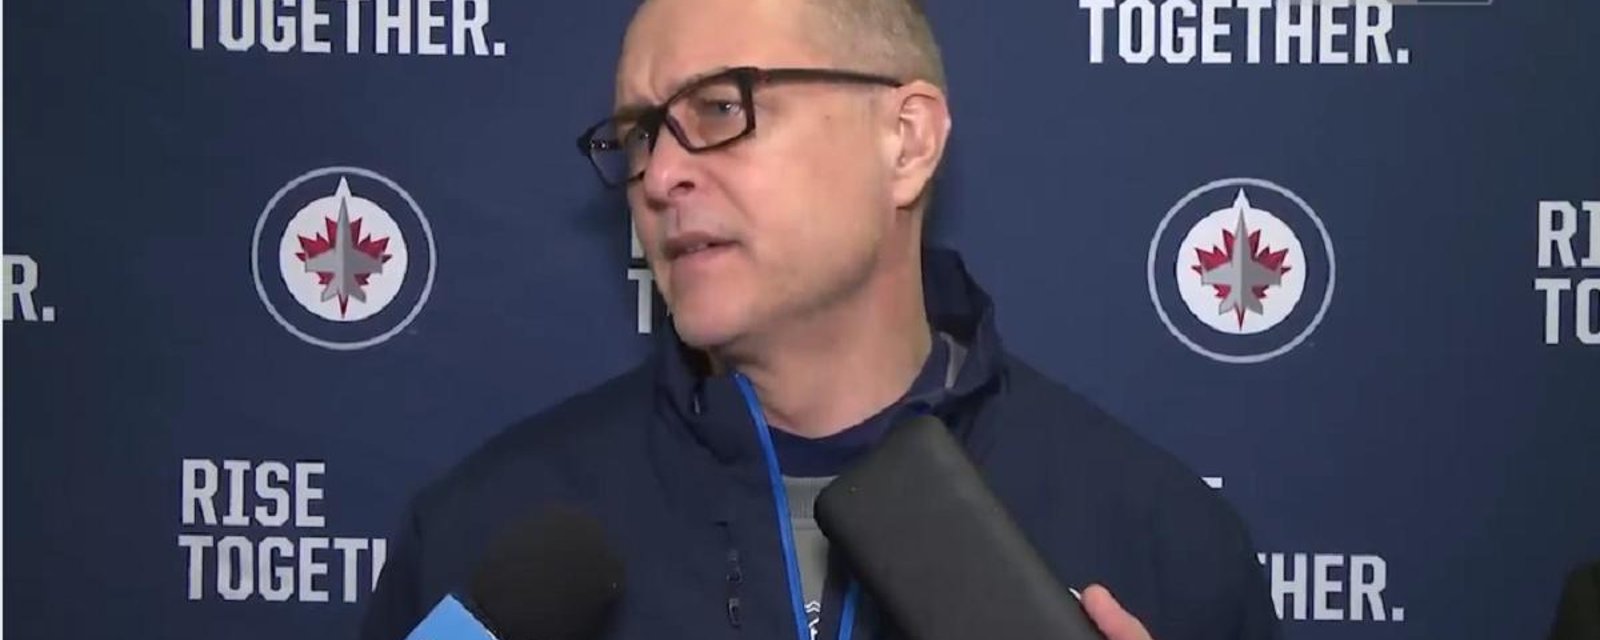 Paul Maurice DESTROYS rival players for being divas.